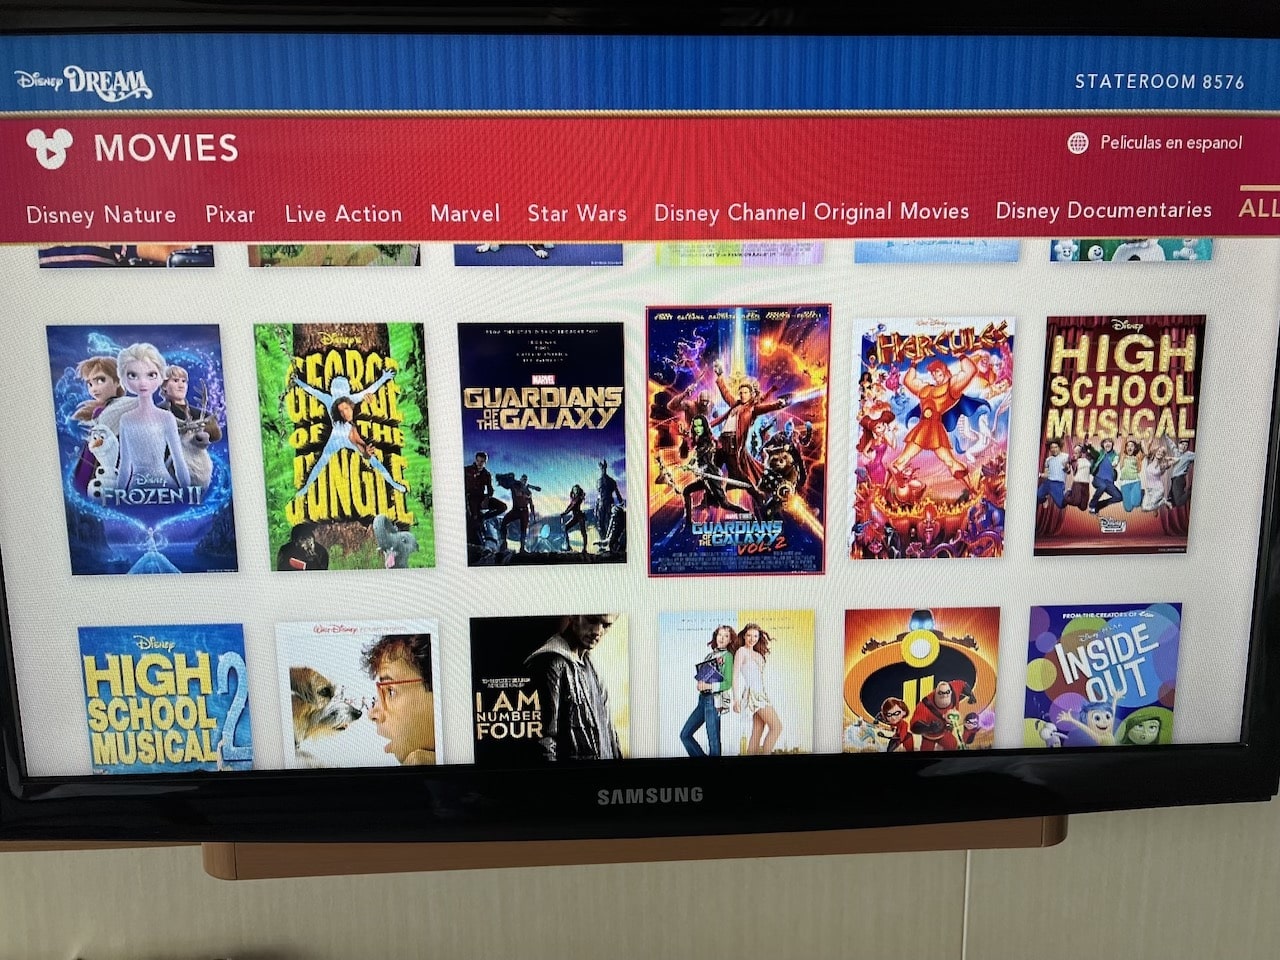 Is Disney+ Available On A Disney Cruise?